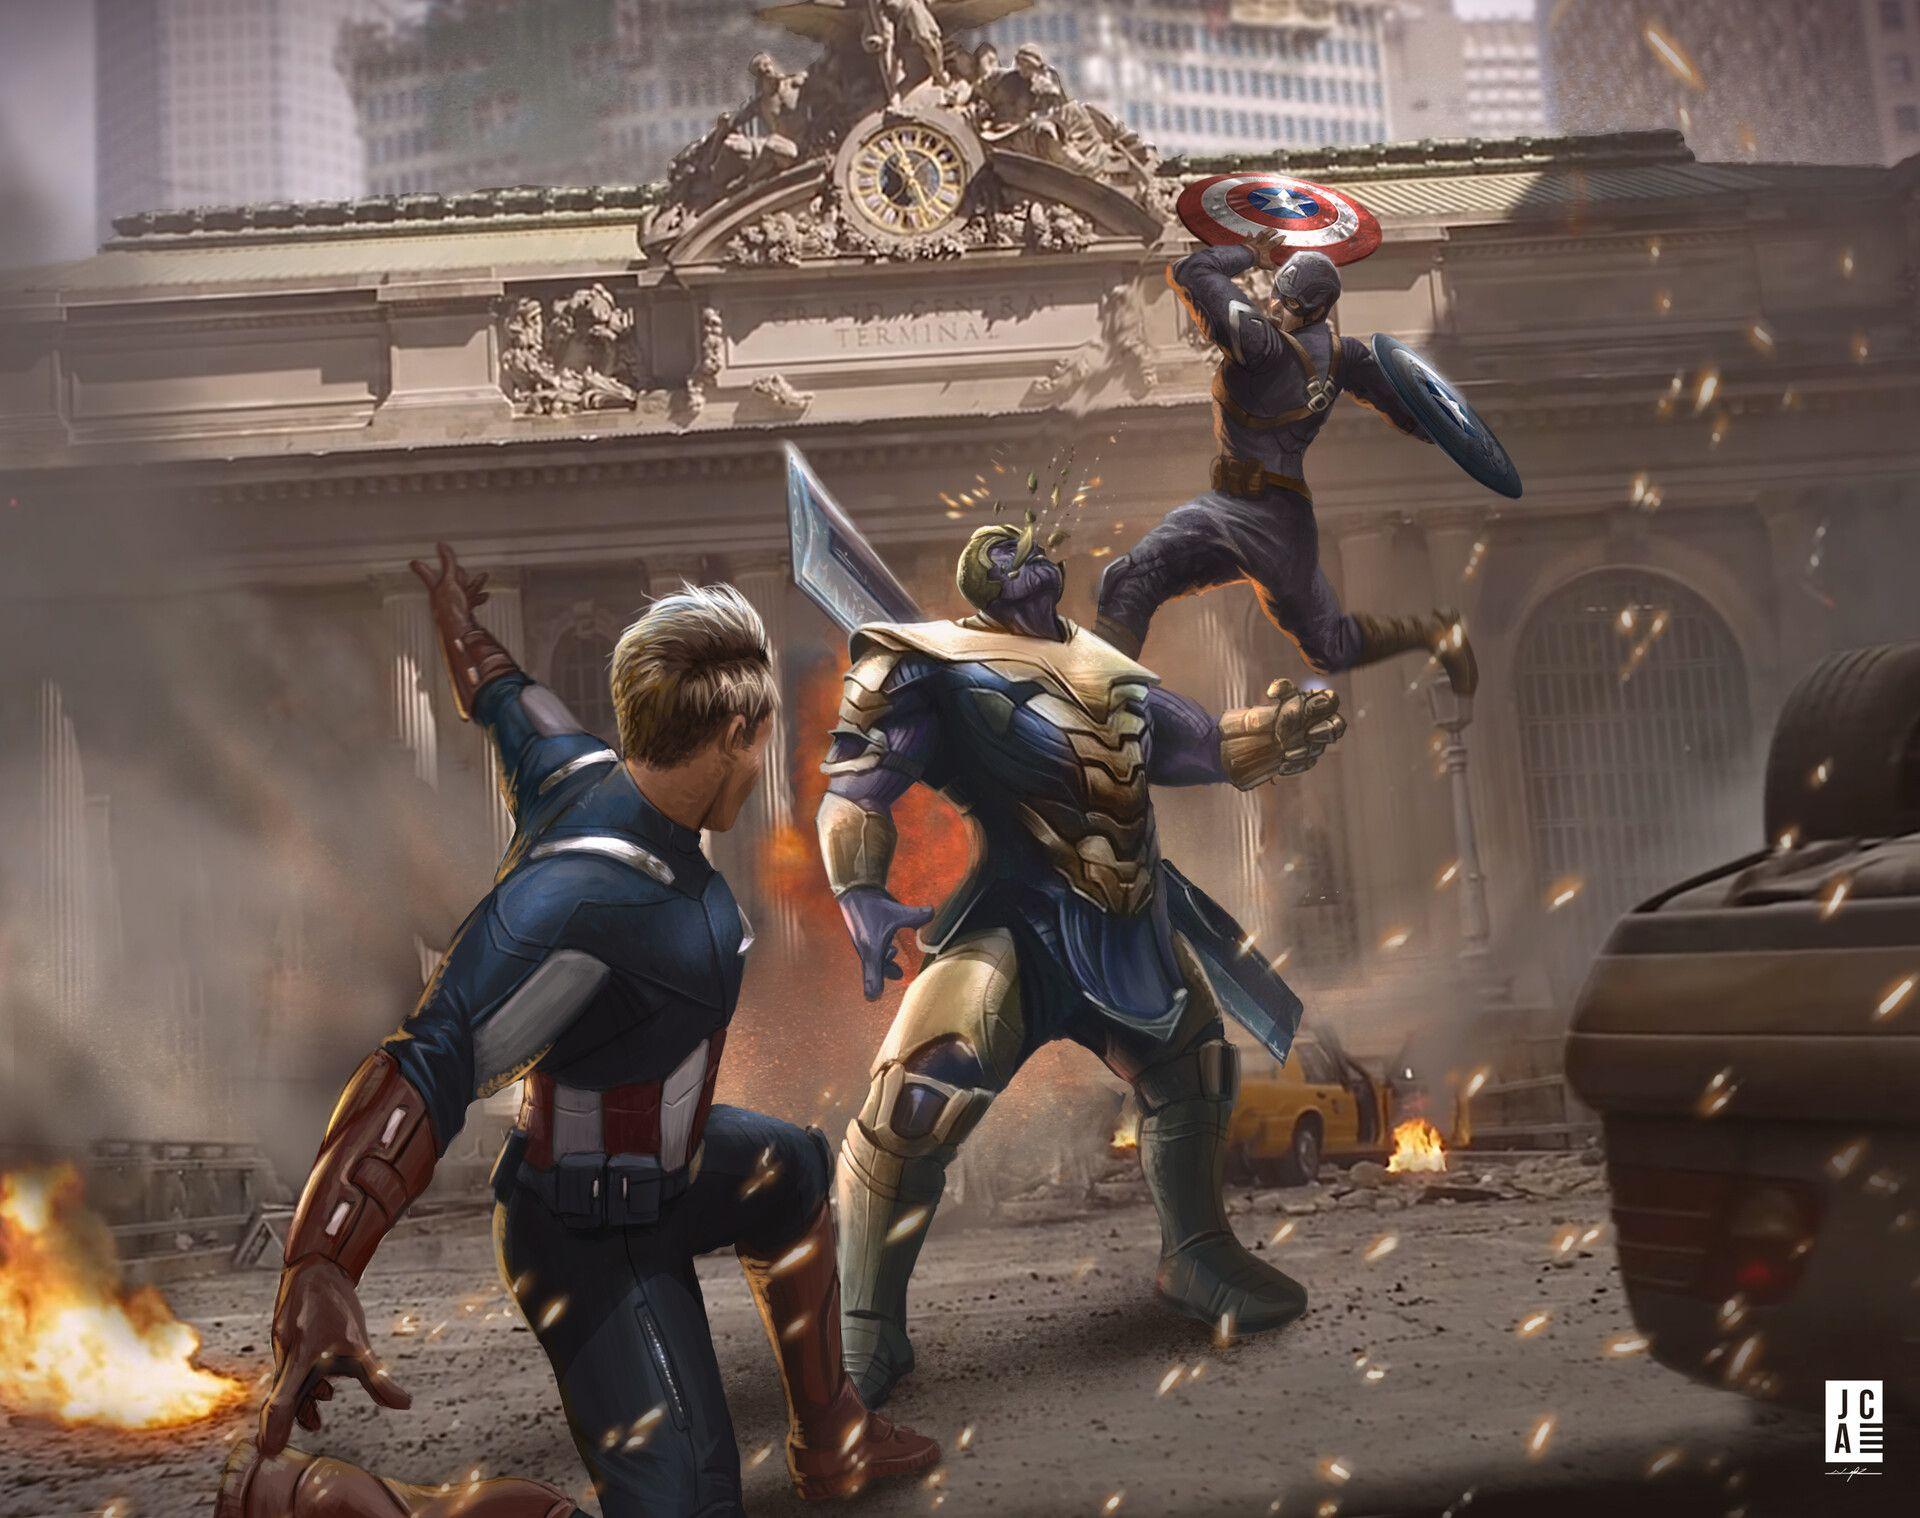 48+ Captain America Vs Thanos Army Wallpaper 4K Pictures